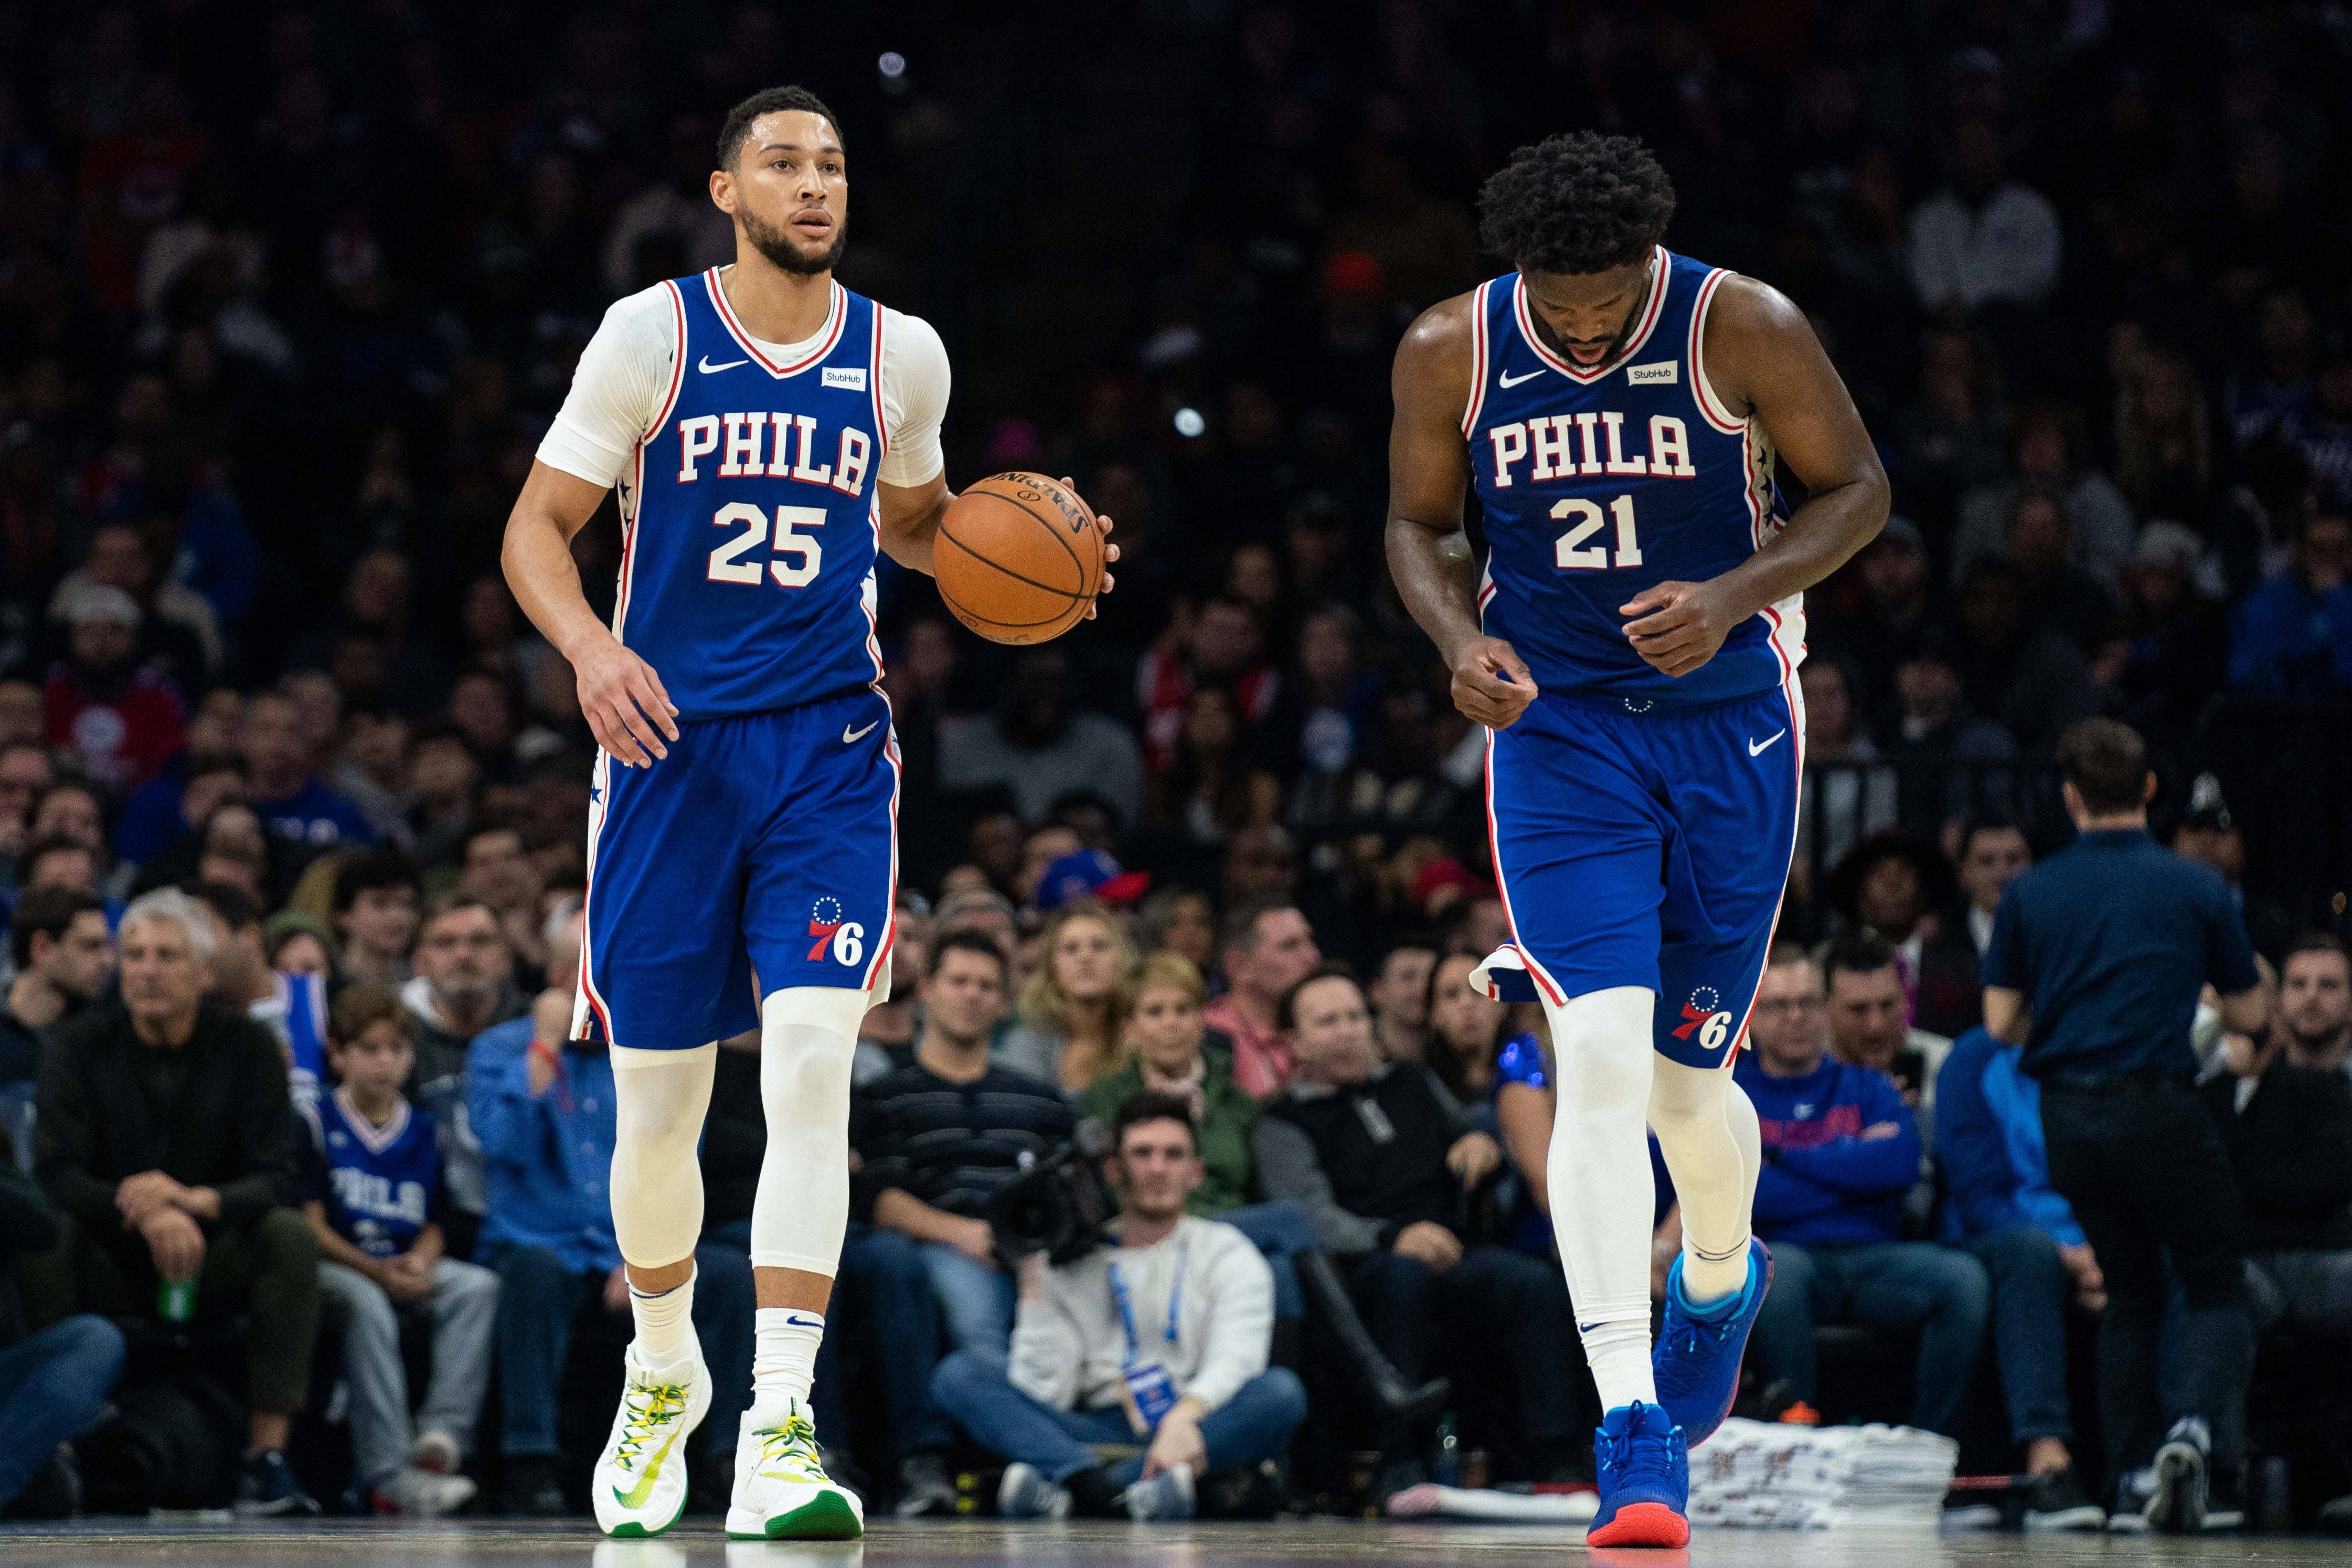 Ben Simmons and Allen Iverson talk about the Philadelphia 76ers